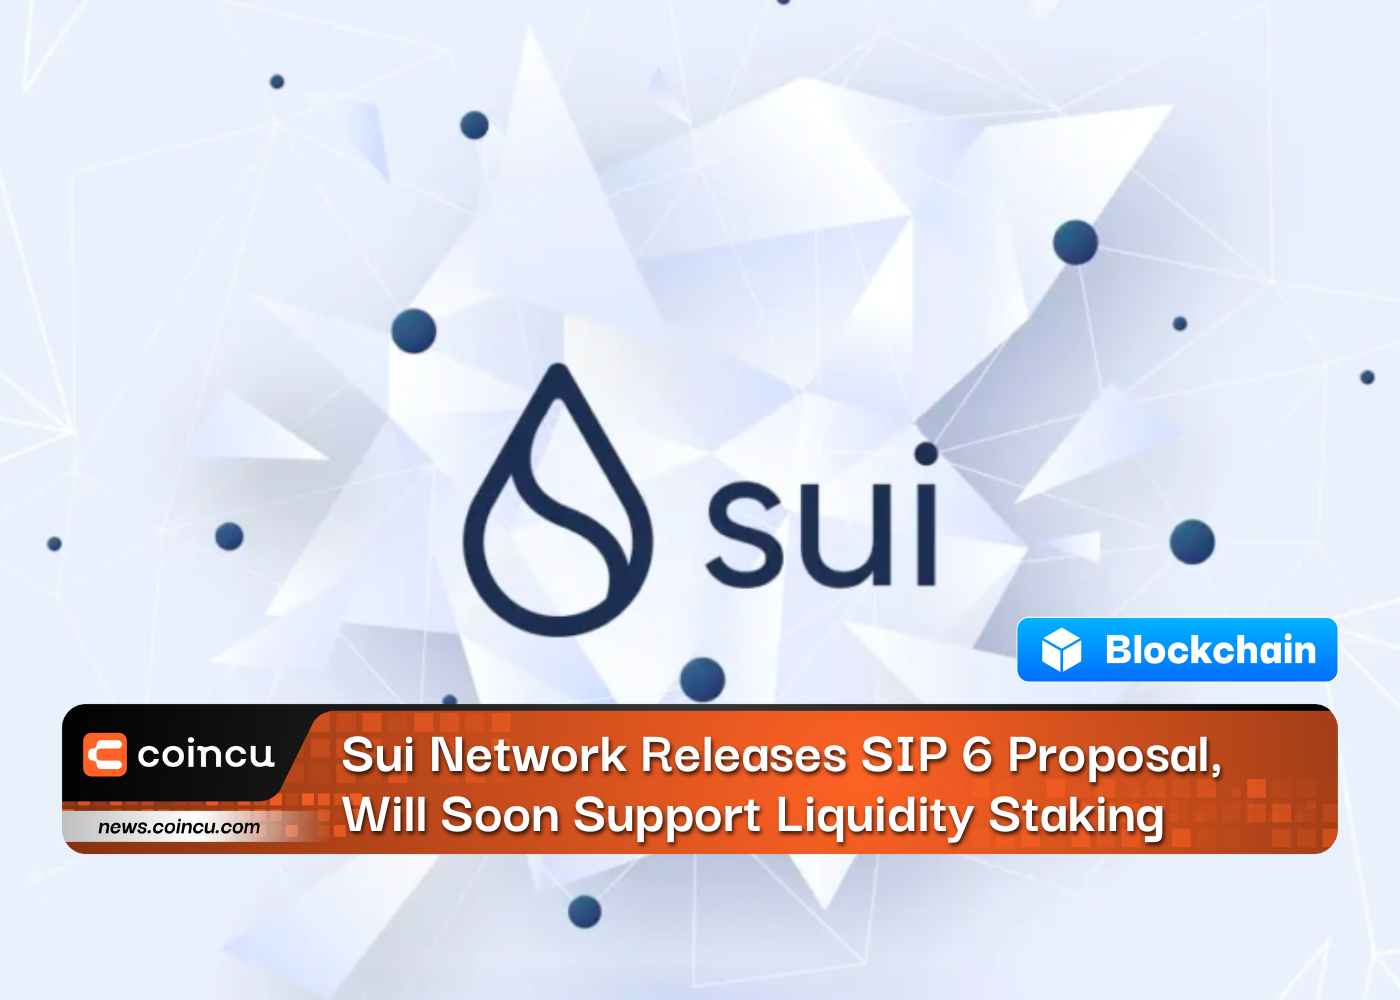 Sui Network Releases SIP 6 Proposal, Will Soon Support Liquidity Staking